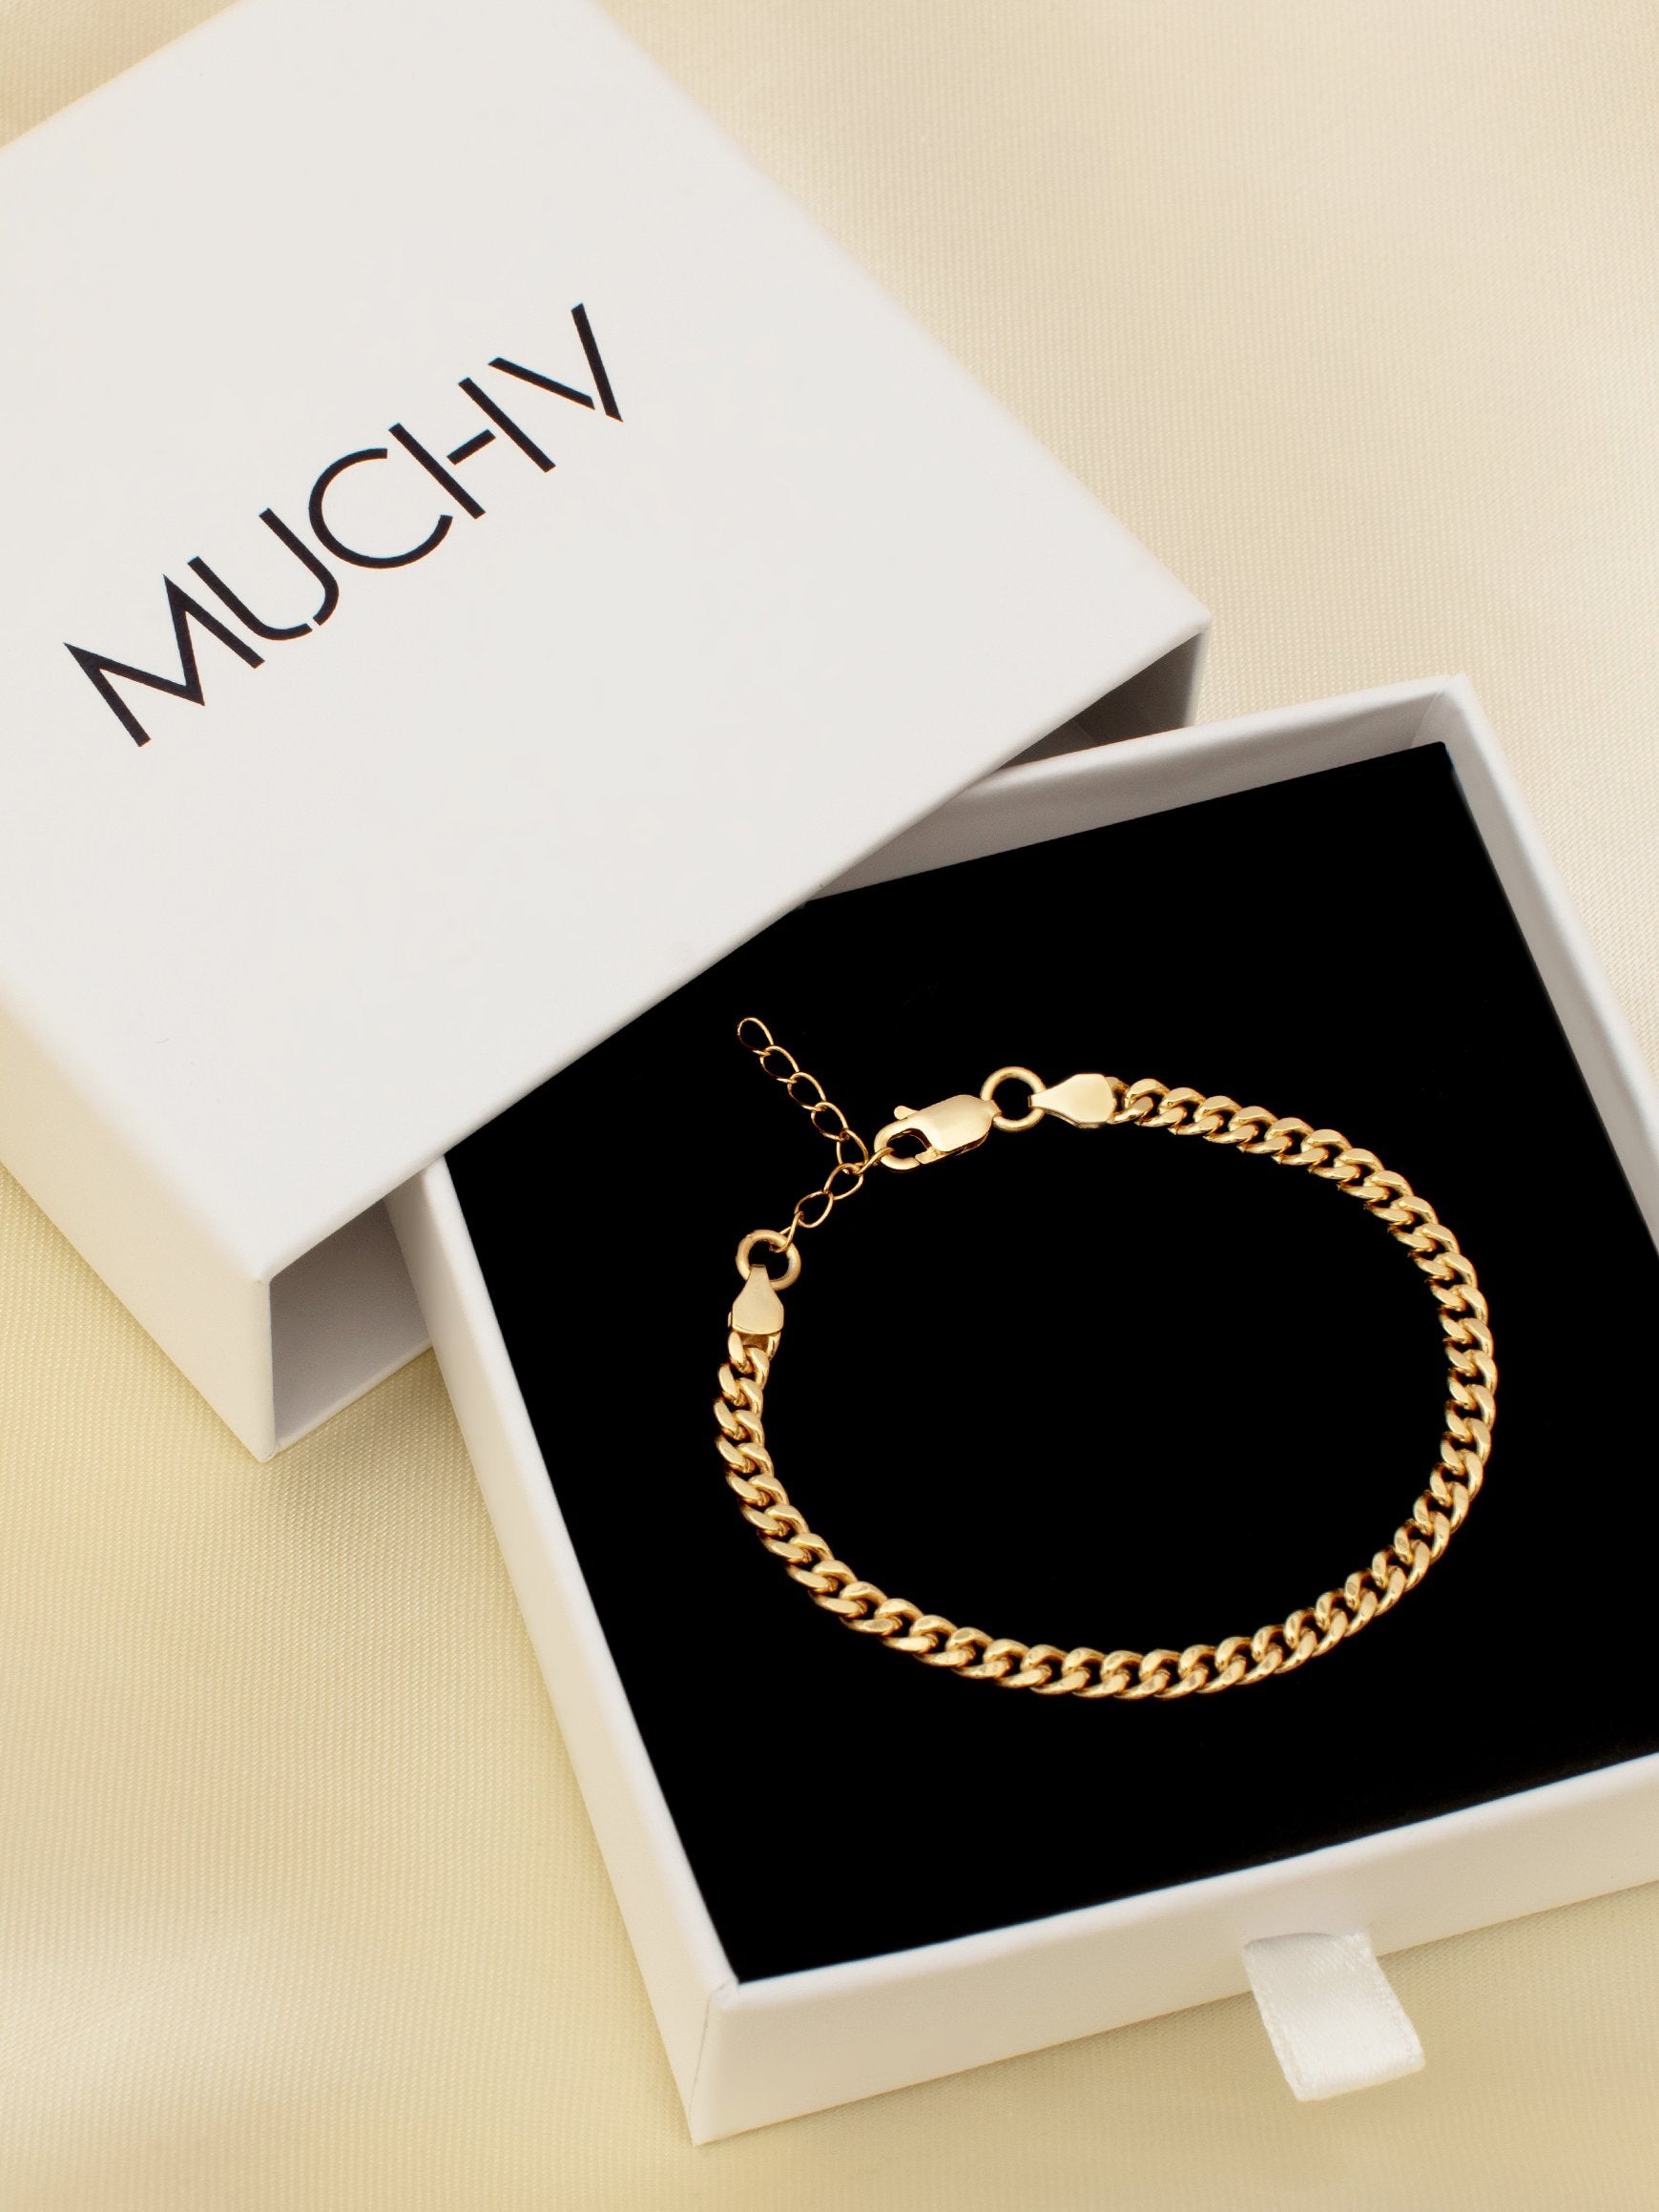 Gold curb chain bracelet with an adjustable chain extender inside a white gift box.